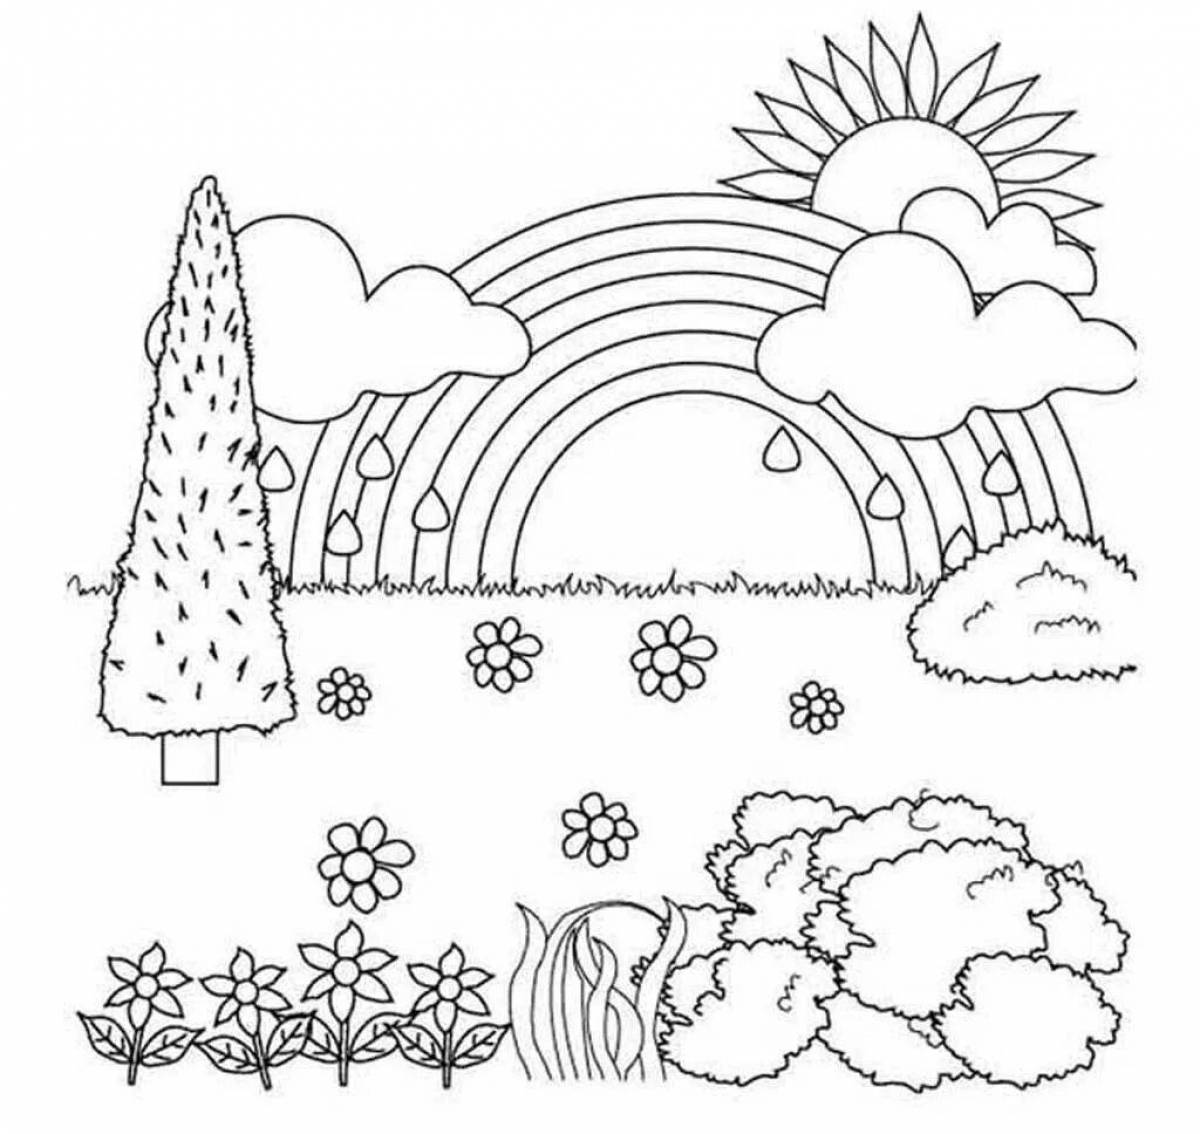 A fun rainbow coloring book for kids